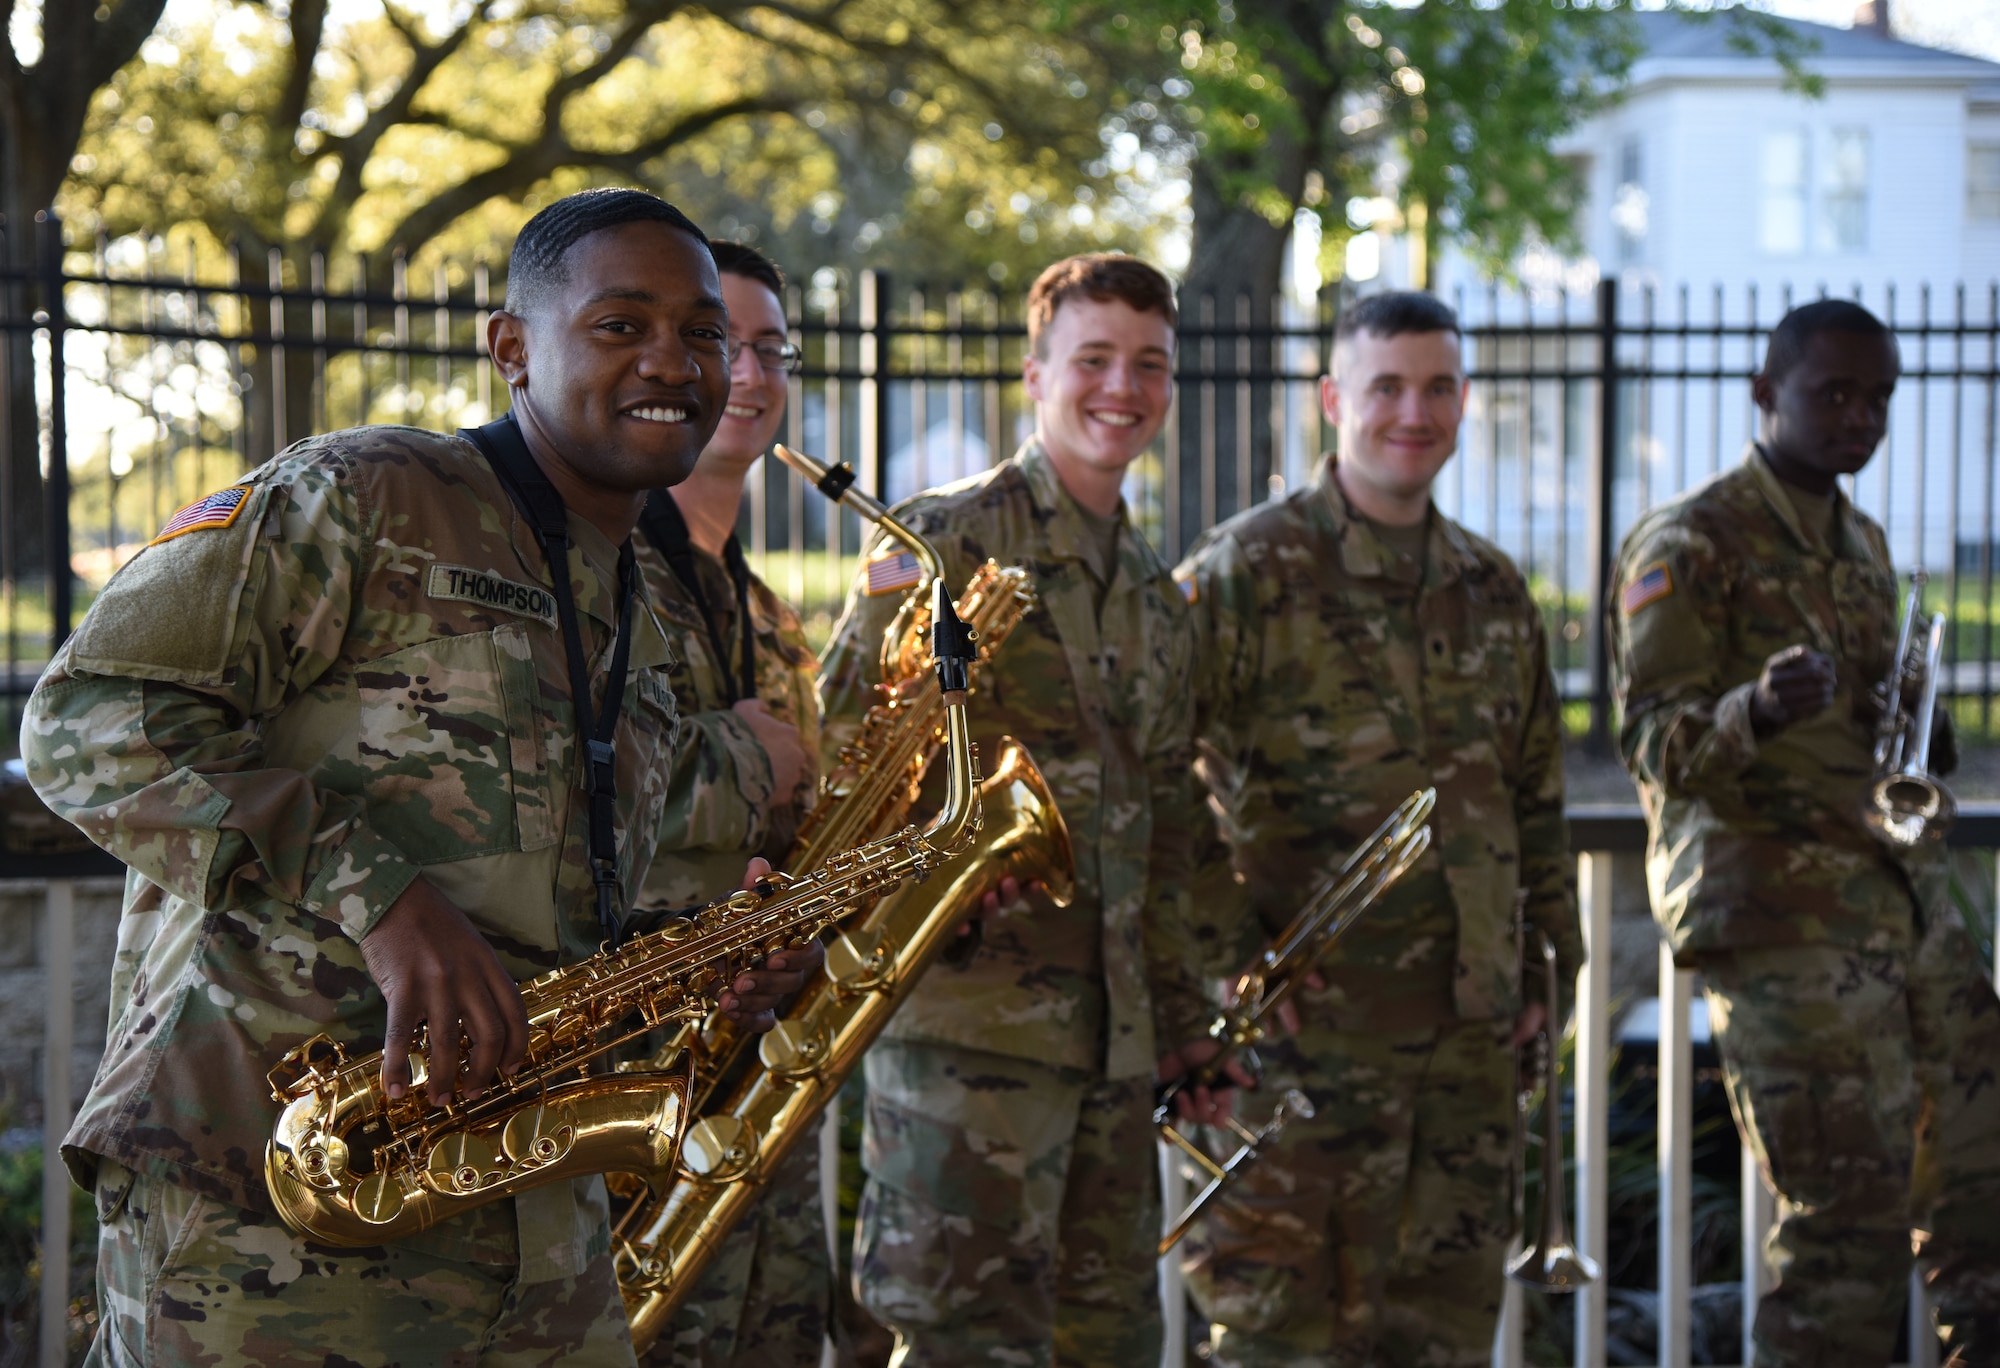 Members of the U.S. Army 41st Army Band, Mississippi Air National Guard, Jackson, Mississippi, pose for a picture at the Biloxi Lighthouse Park Pavilion March 13, 2018, in Biloxi, Mississippi. The band has been providing musical support and entertainment for over 50 years. They also performed at the White House Hotel, in Biloxi, Mississippi, and at the Vandenberg Commons on Keesler Air Force Base, Mississippi. (U.S. Air Force photo by Kemberly Groue)